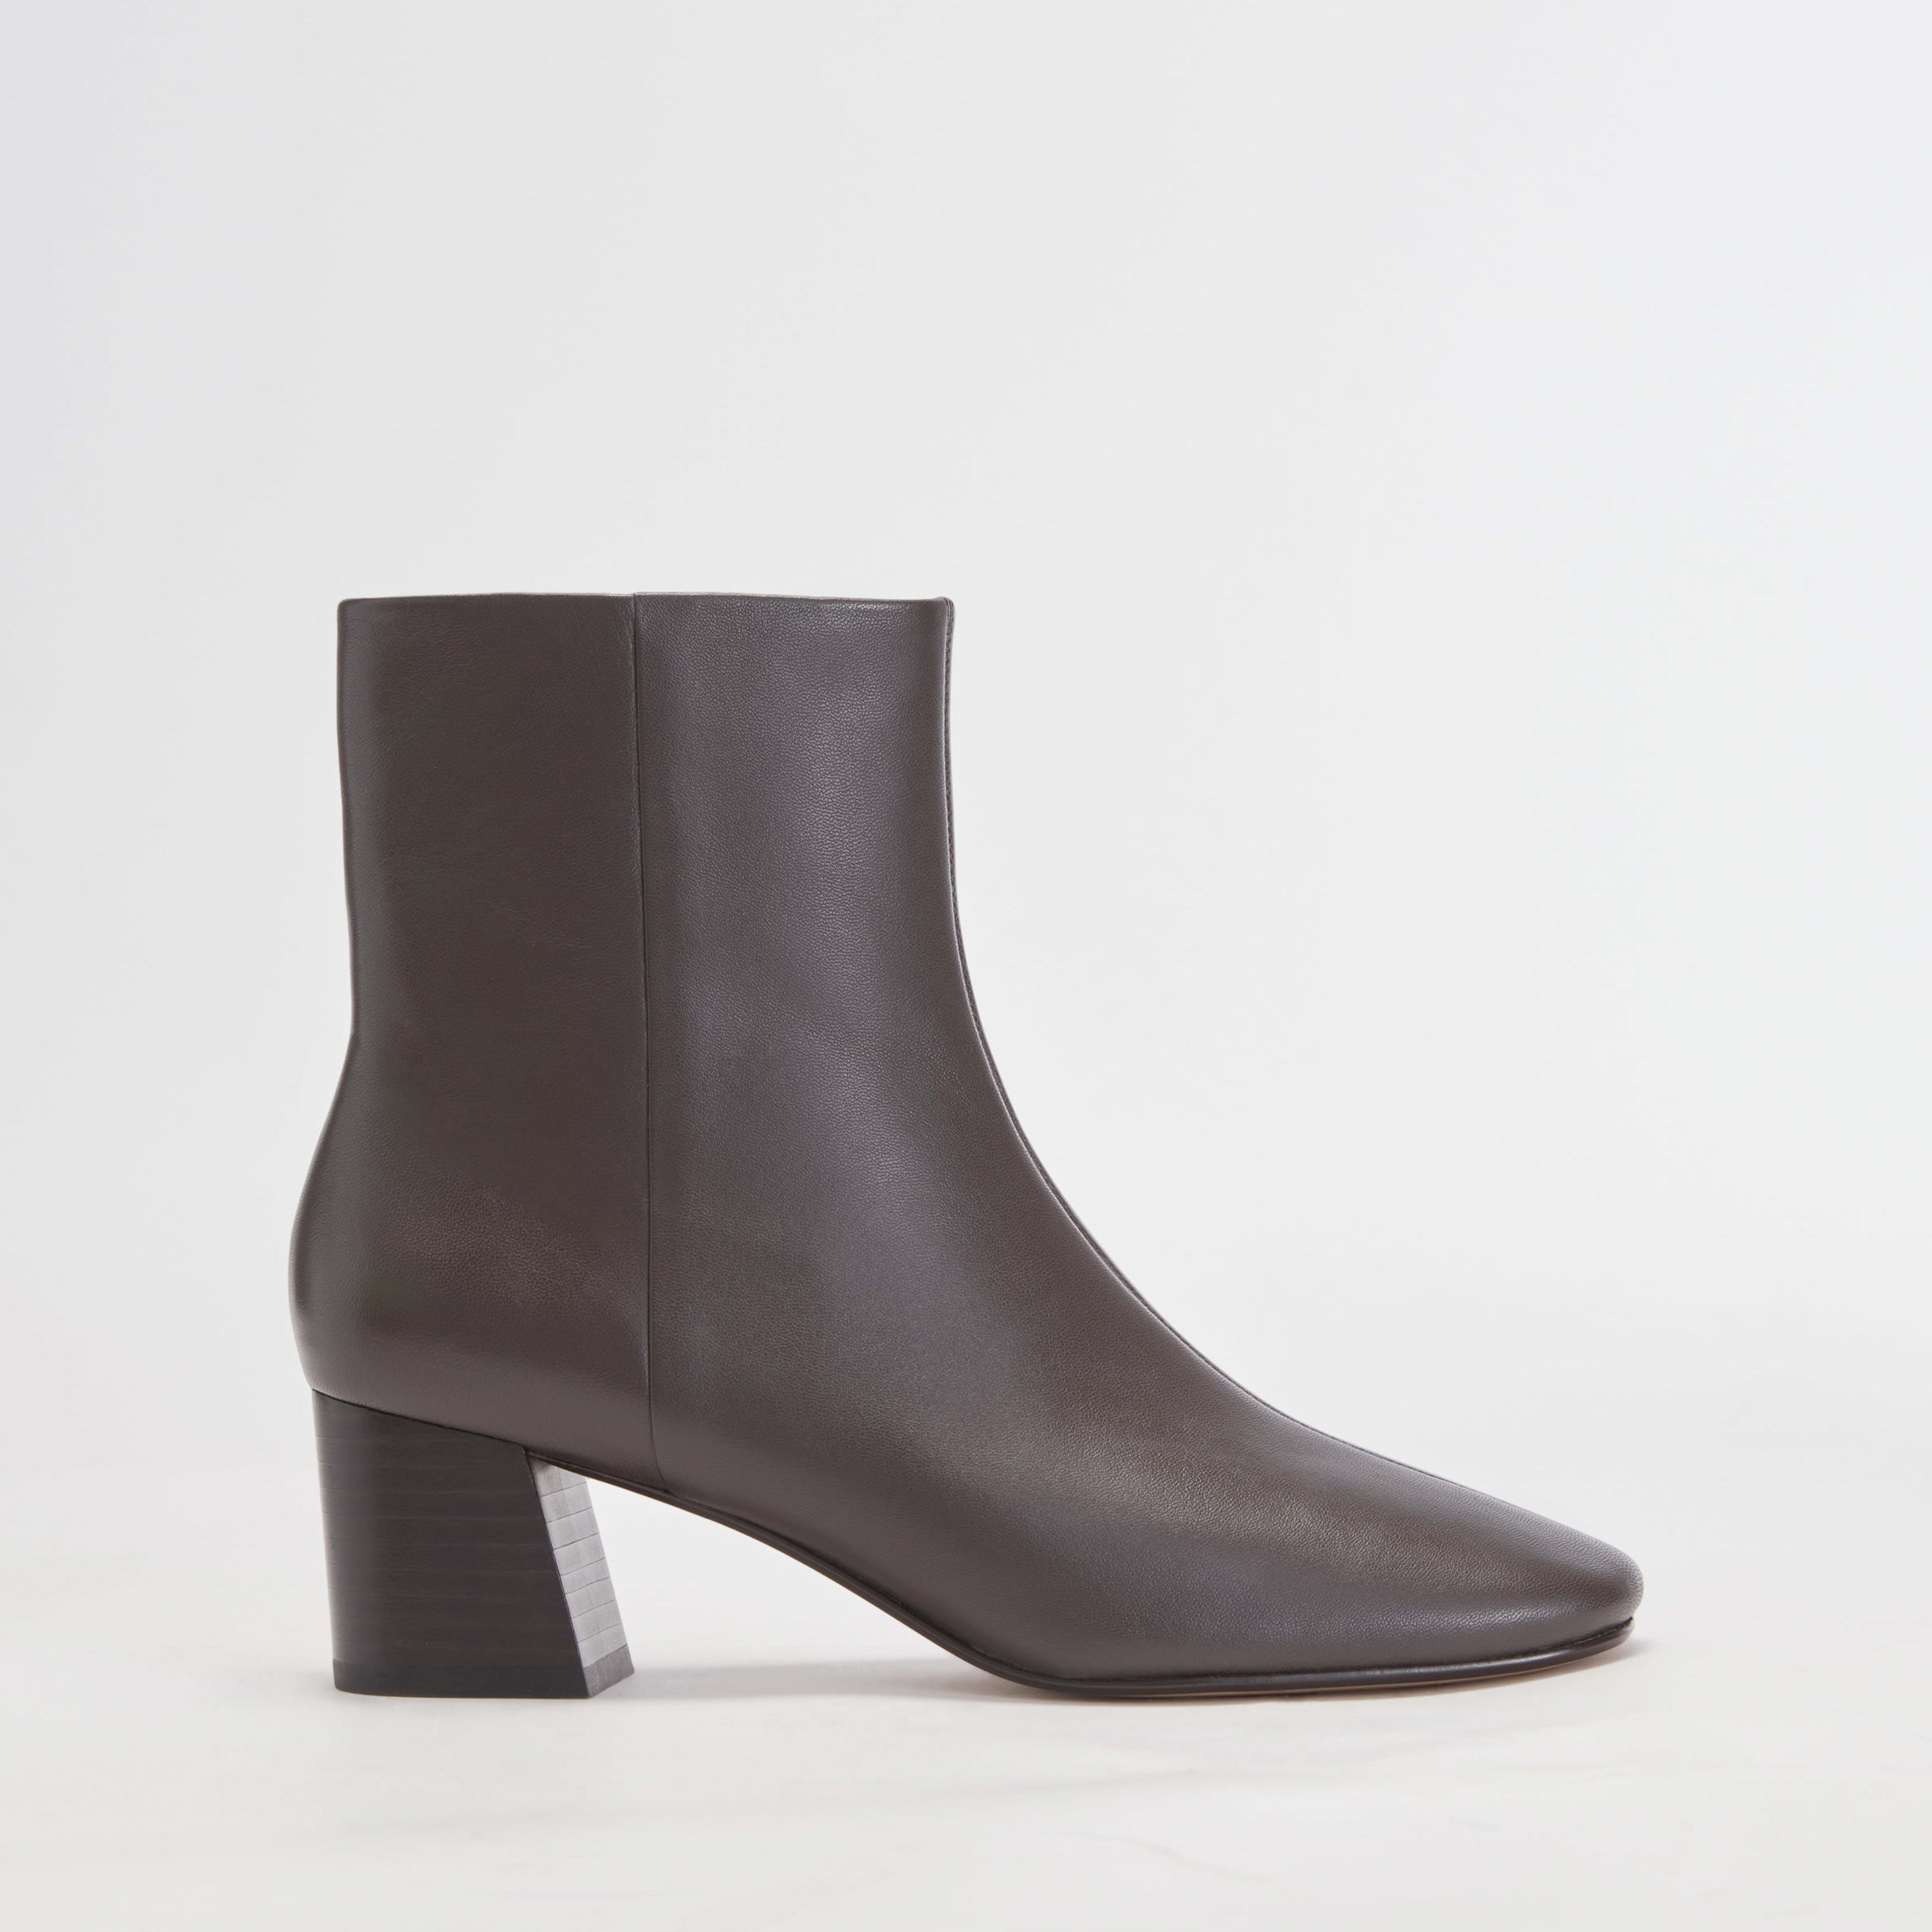 chelsea boot by everlane in dark brown, size 5